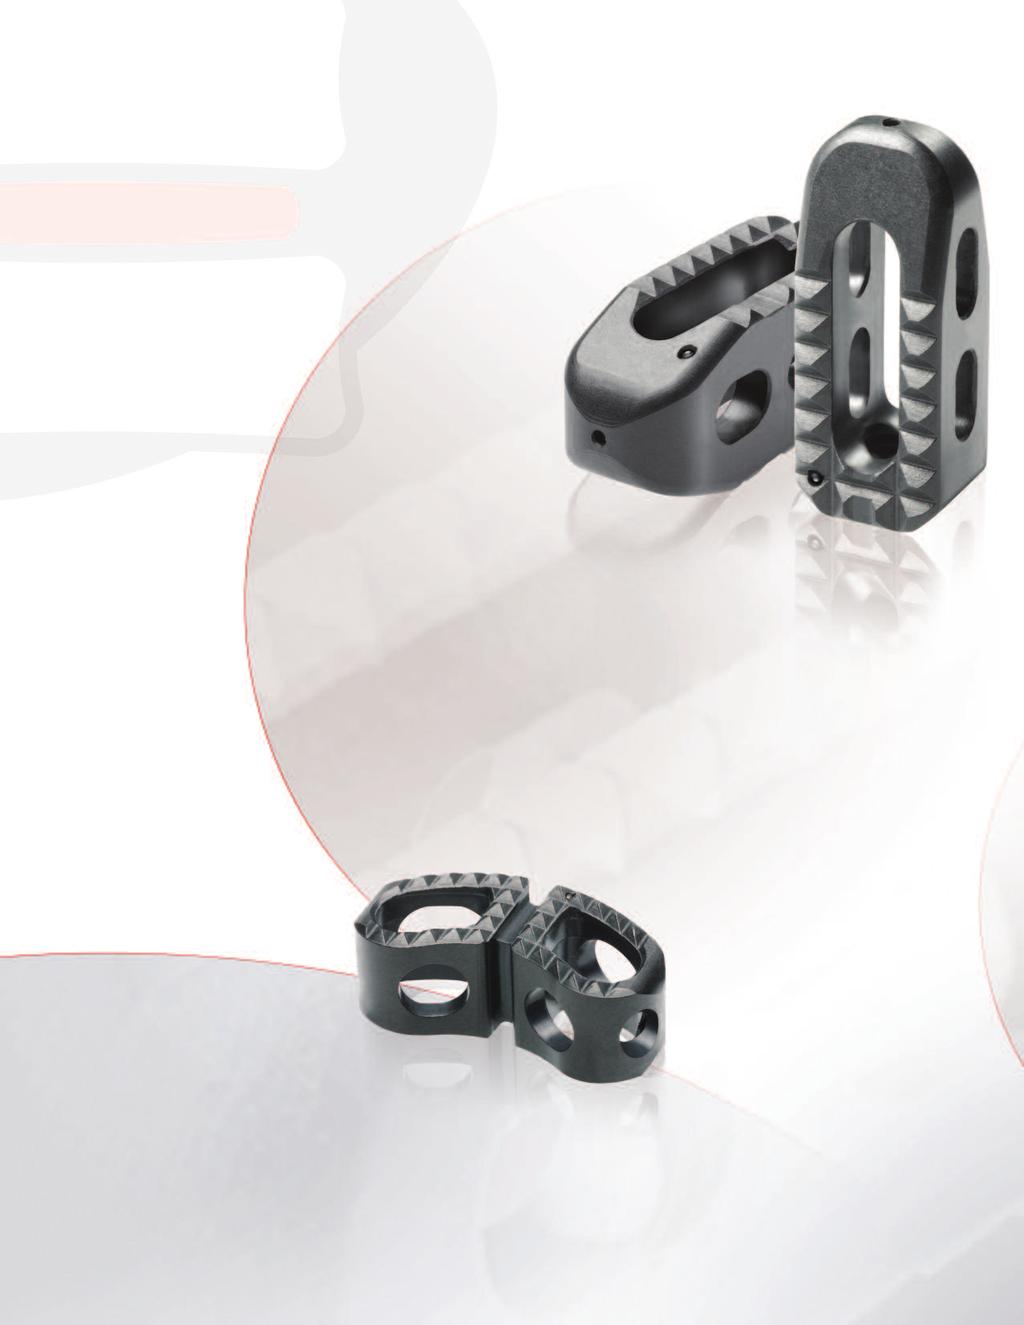 Interbody Fusion Platform The DePuy Spine Interbody Fusion platform is designed to provide an open architecture implant in a load-sharing environment.